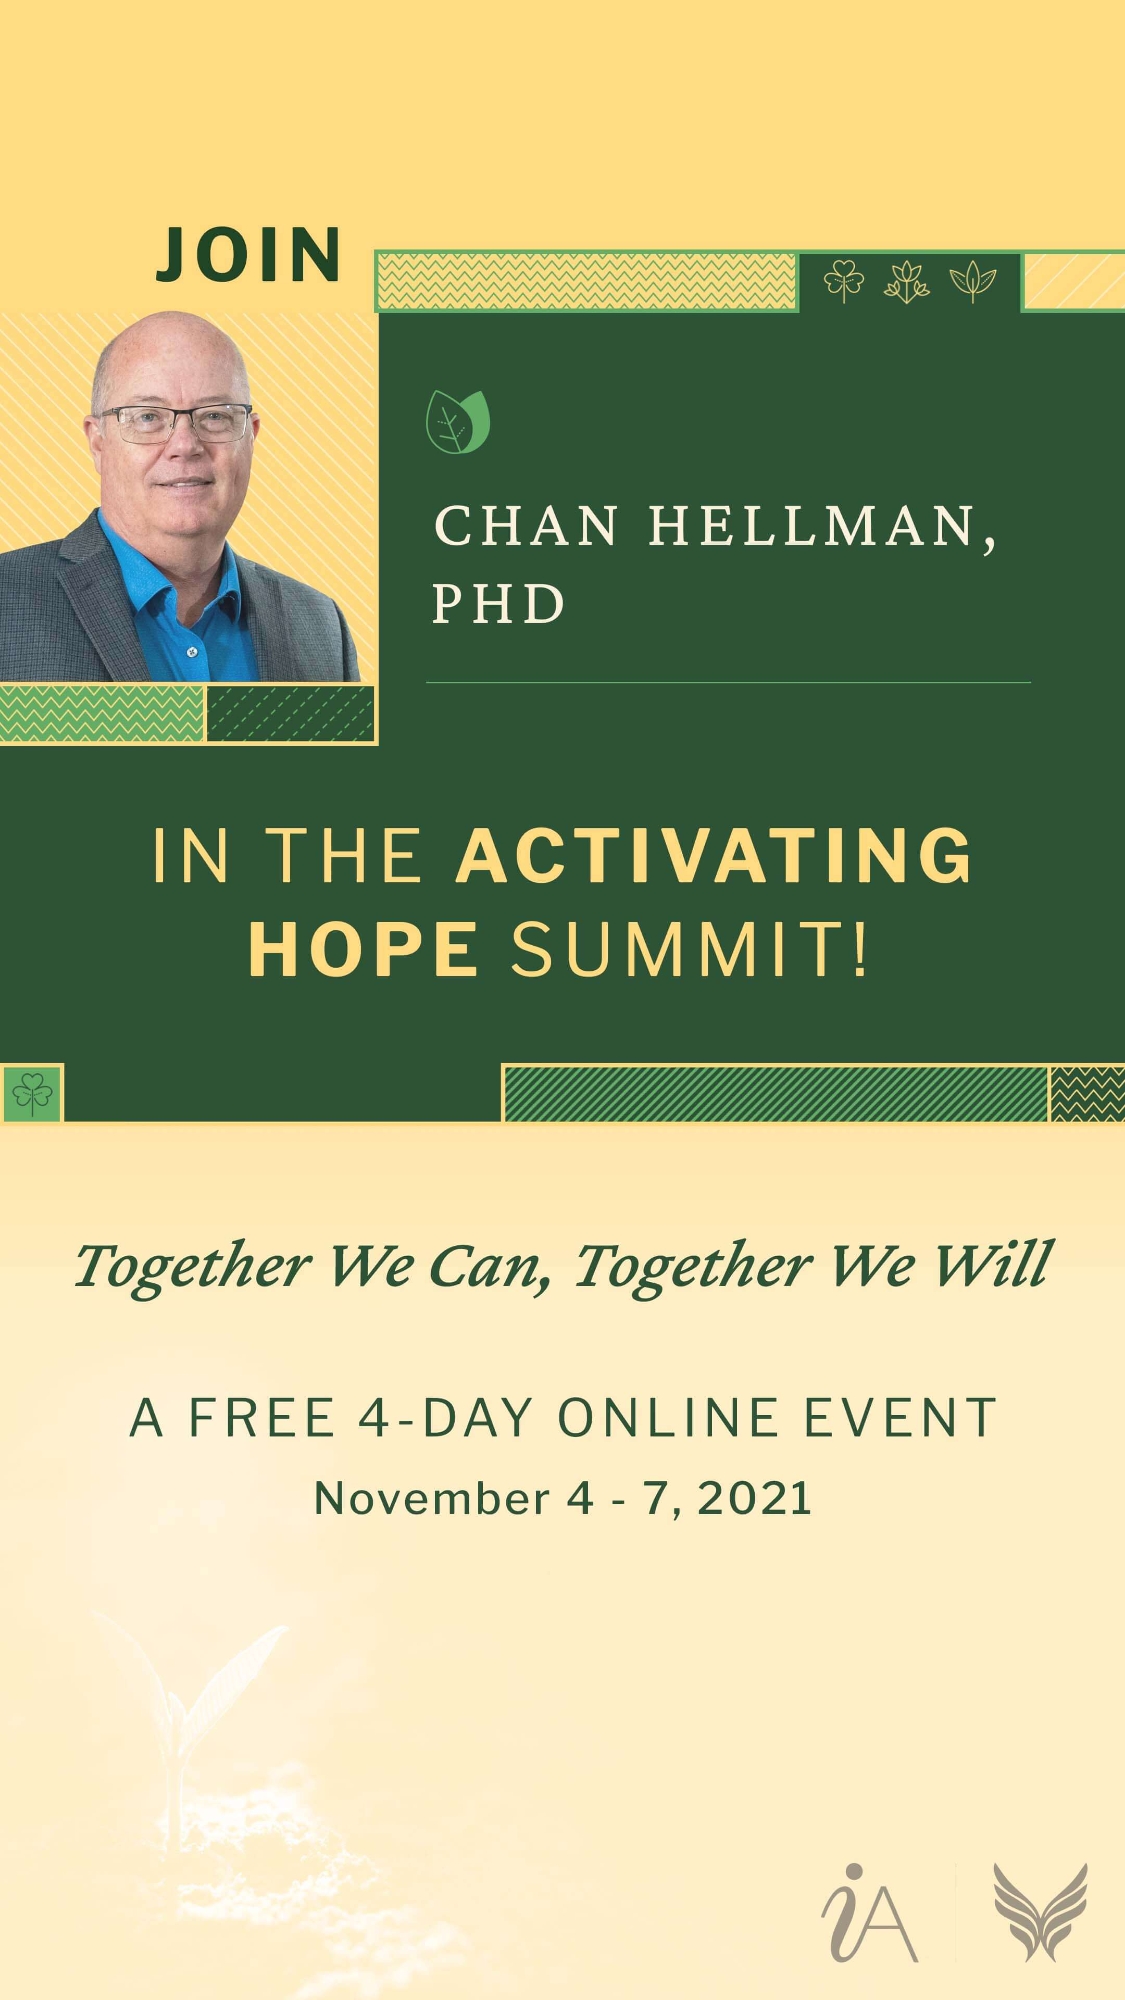 Join Chan Hellman PHD in the Activating Hope Summit Together We Can Together We Will a Free 4-Day Online Event November 4-7 2-01